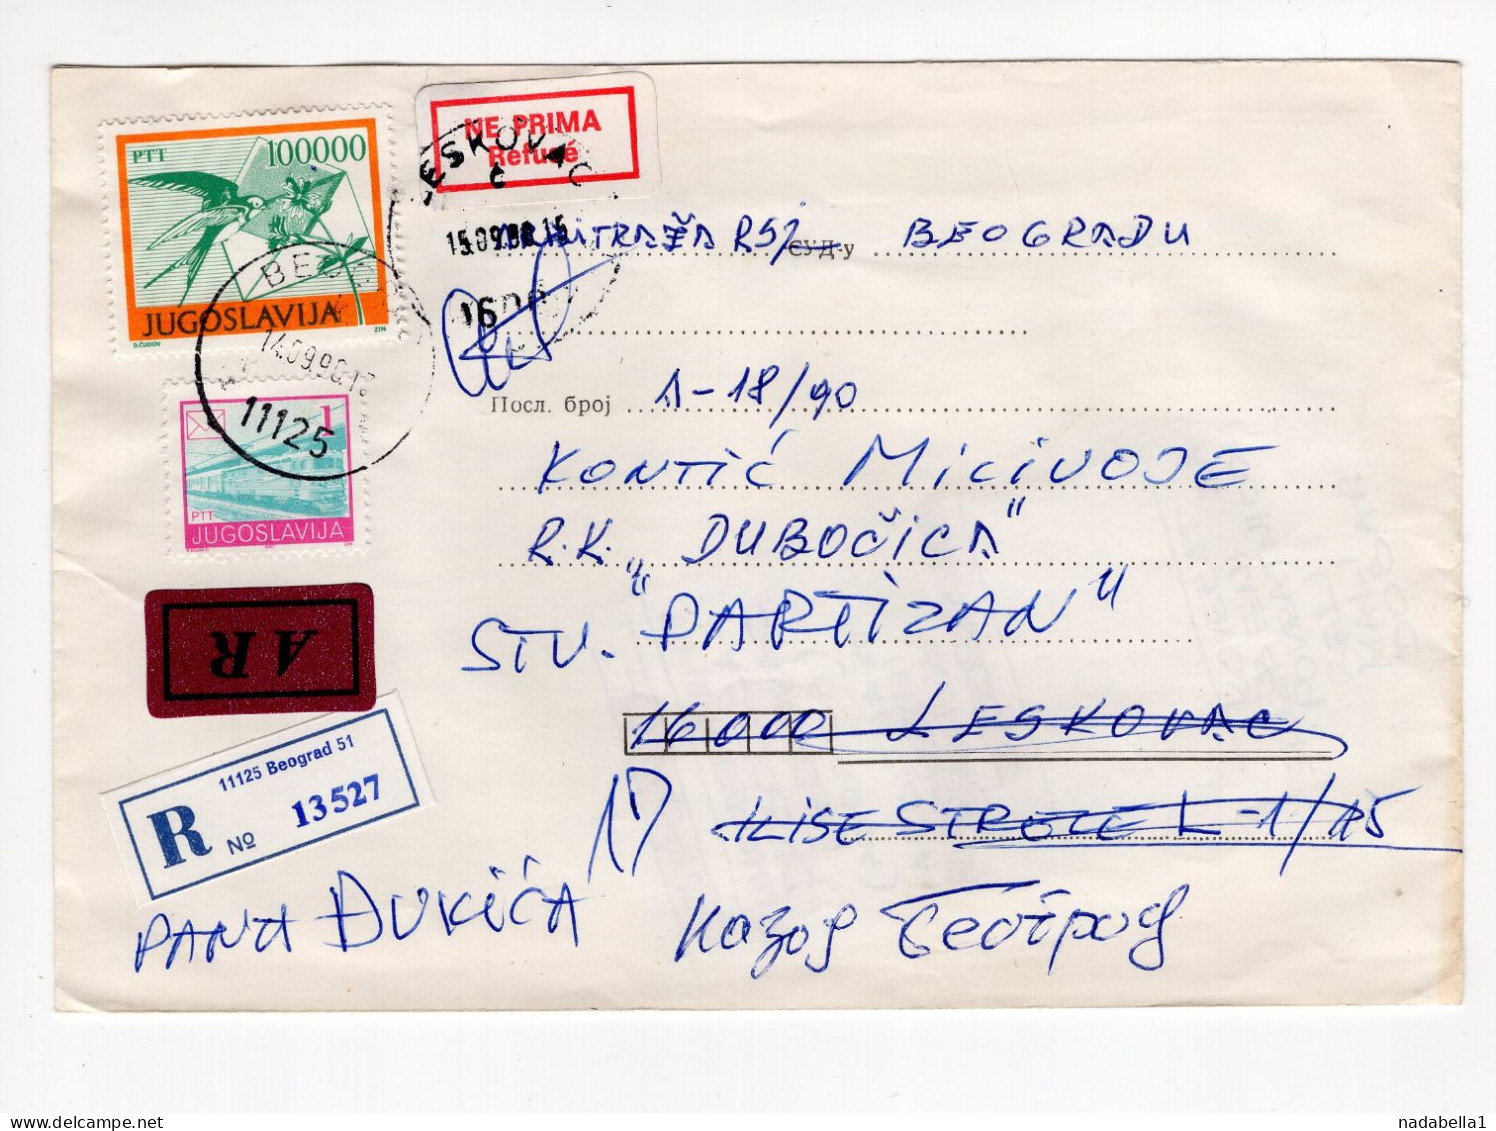 1990. YUGOSLAVIA,SERBIA,BELGRADE TO LESKOVAC AND BACK,AR,RECORDED COVER,INFLATION,INFLATIONARY MAIL,LABEL:REFUSED - Briefe U. Dokumente